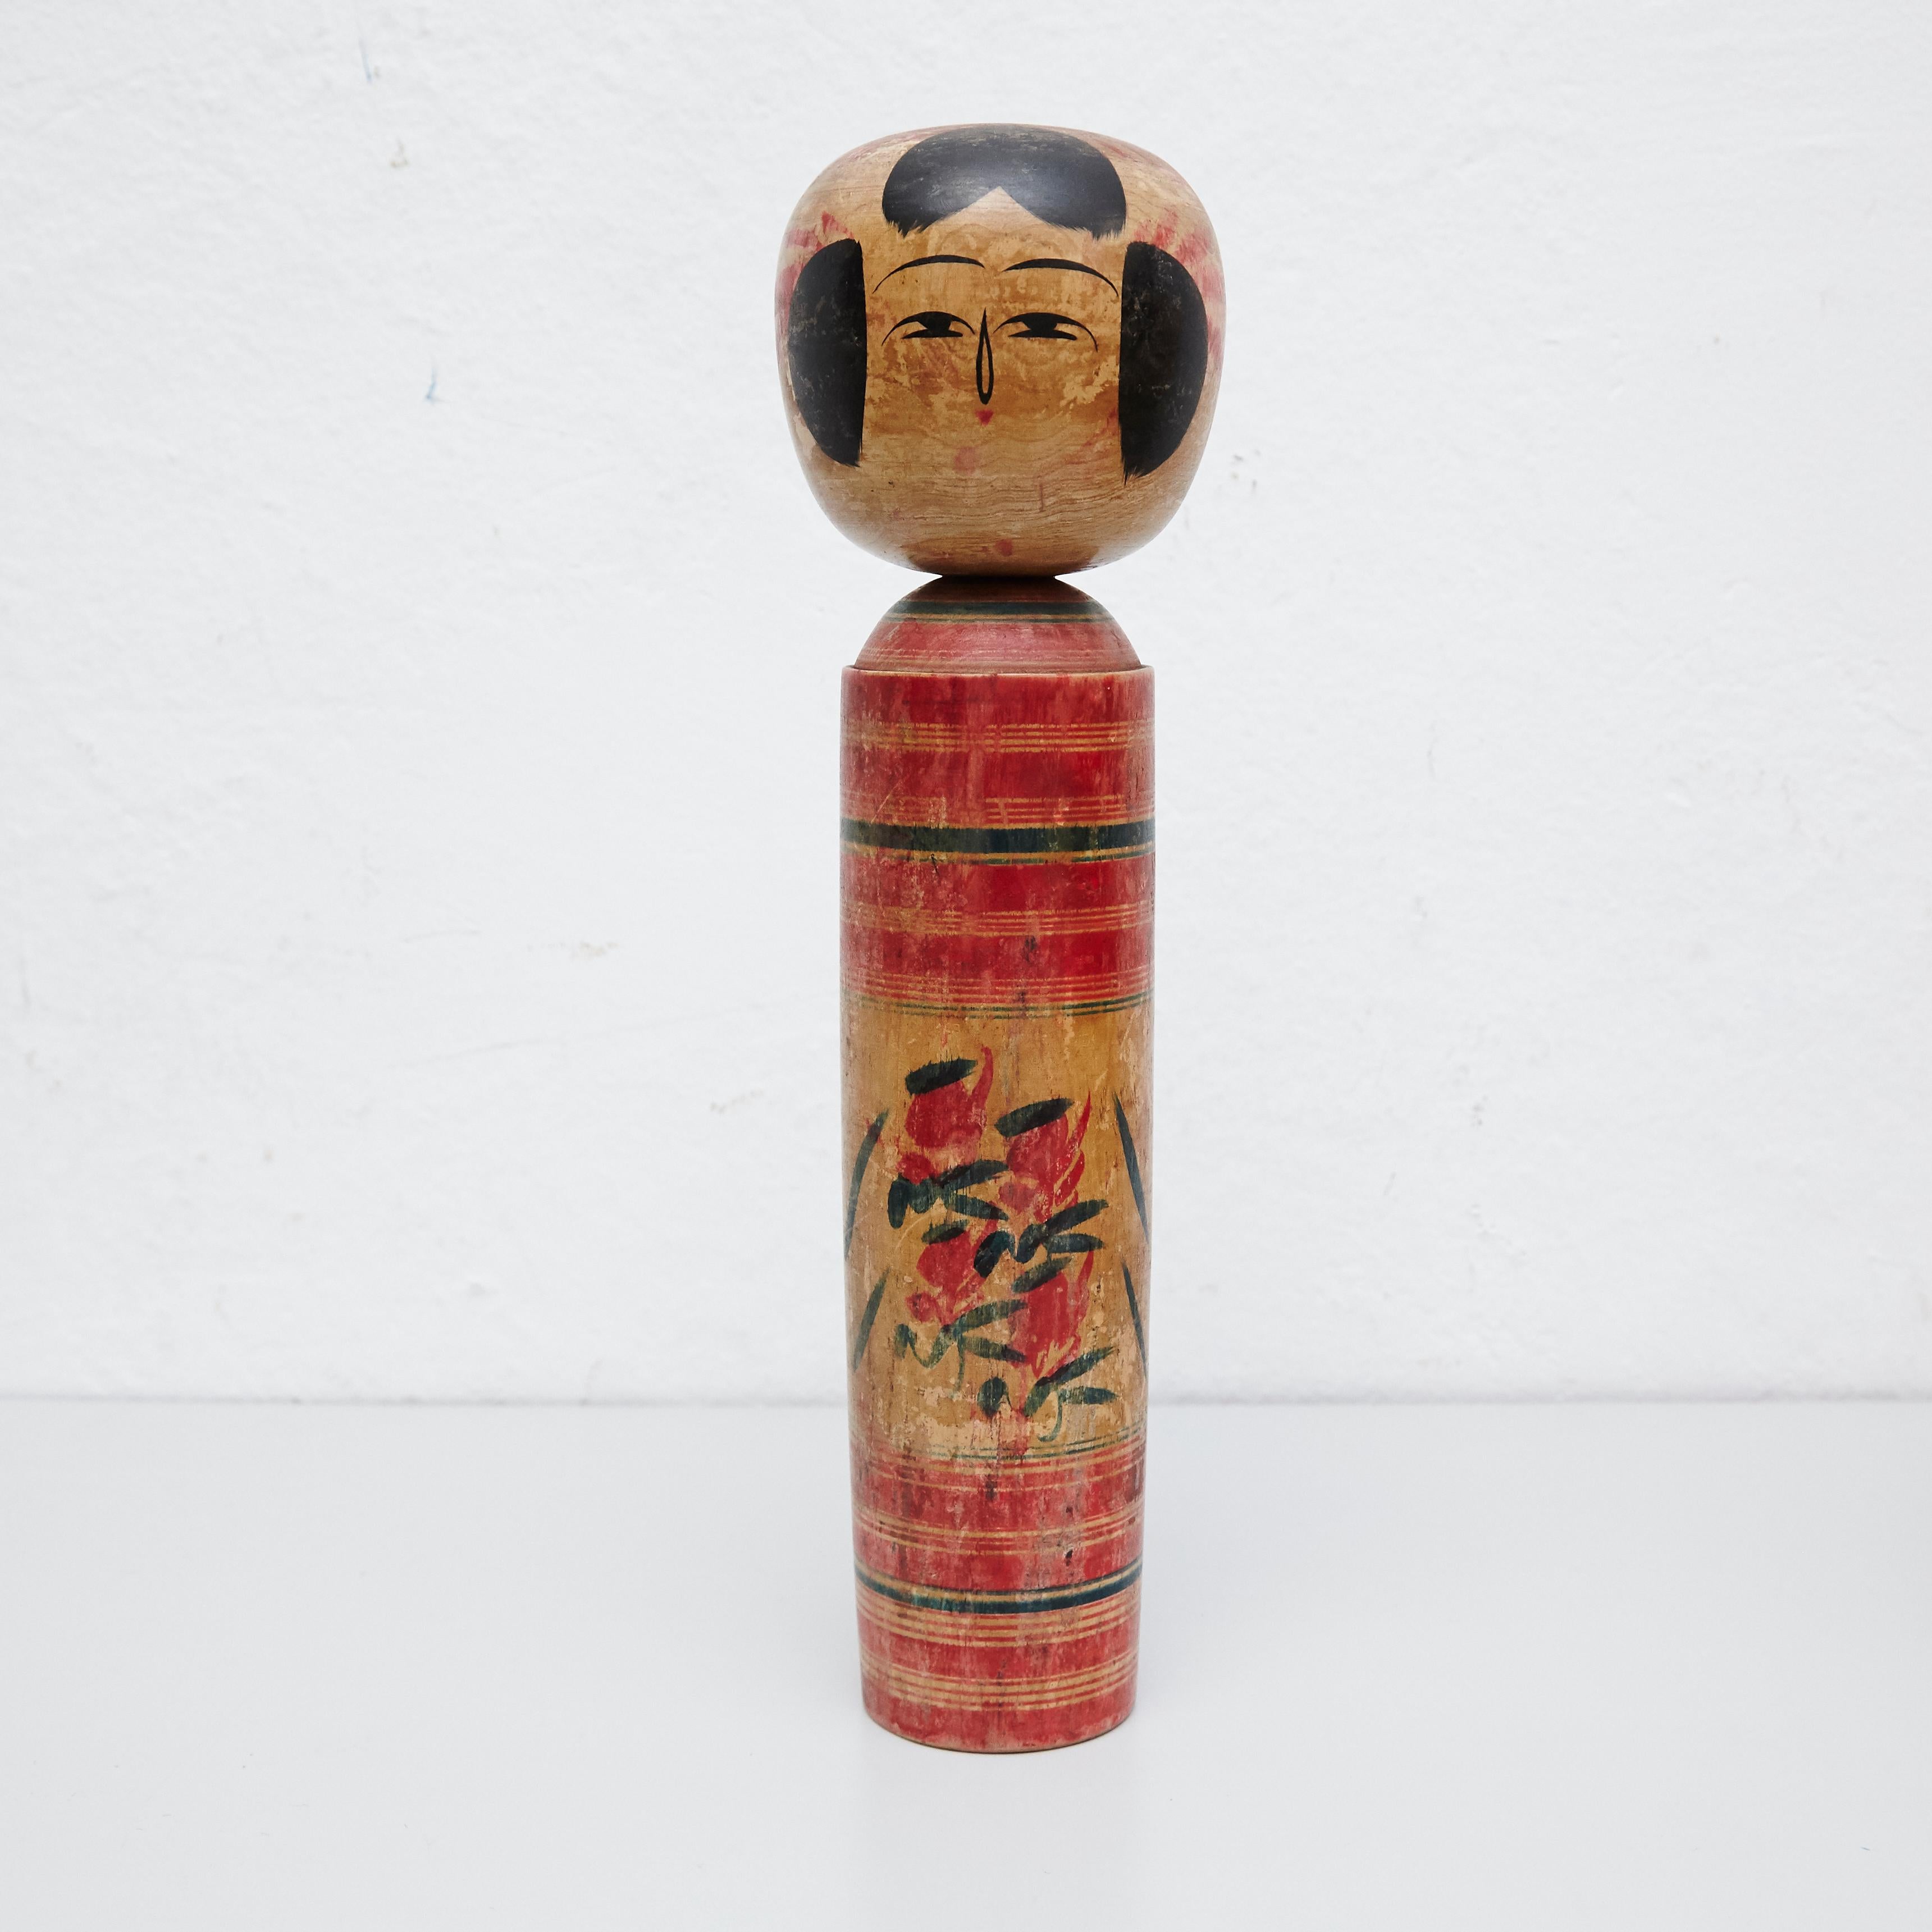 Japanese dolls called Kokeshi of the early 20th century.
Provenance from the northern Japan.
Set of 2.

Measures: 

37 x 10.5 cm
36 x 11 cm


Handmade by Japanese artisants from wood. Have a simple trunk as a body and an enlarged head. One